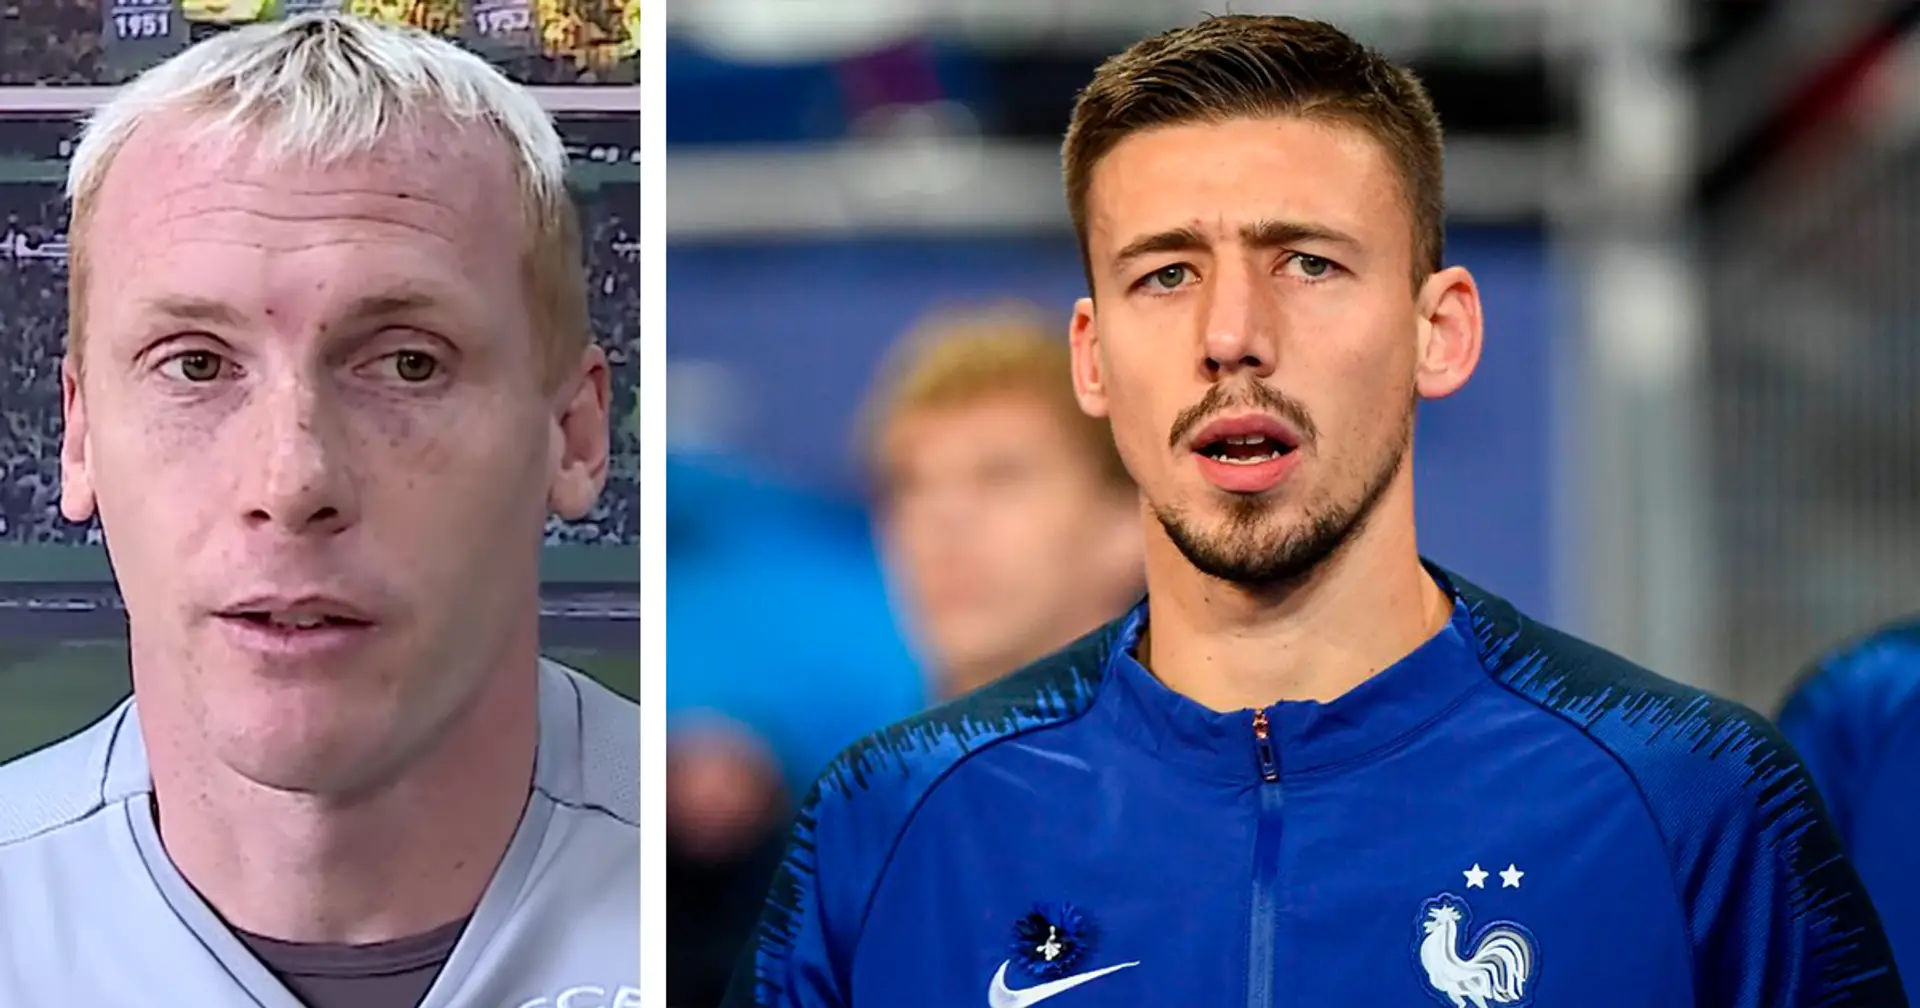 'No one supported me at Barca. Everyone's killing Lenglet now, I know how it feels': Jeremy Mathieu